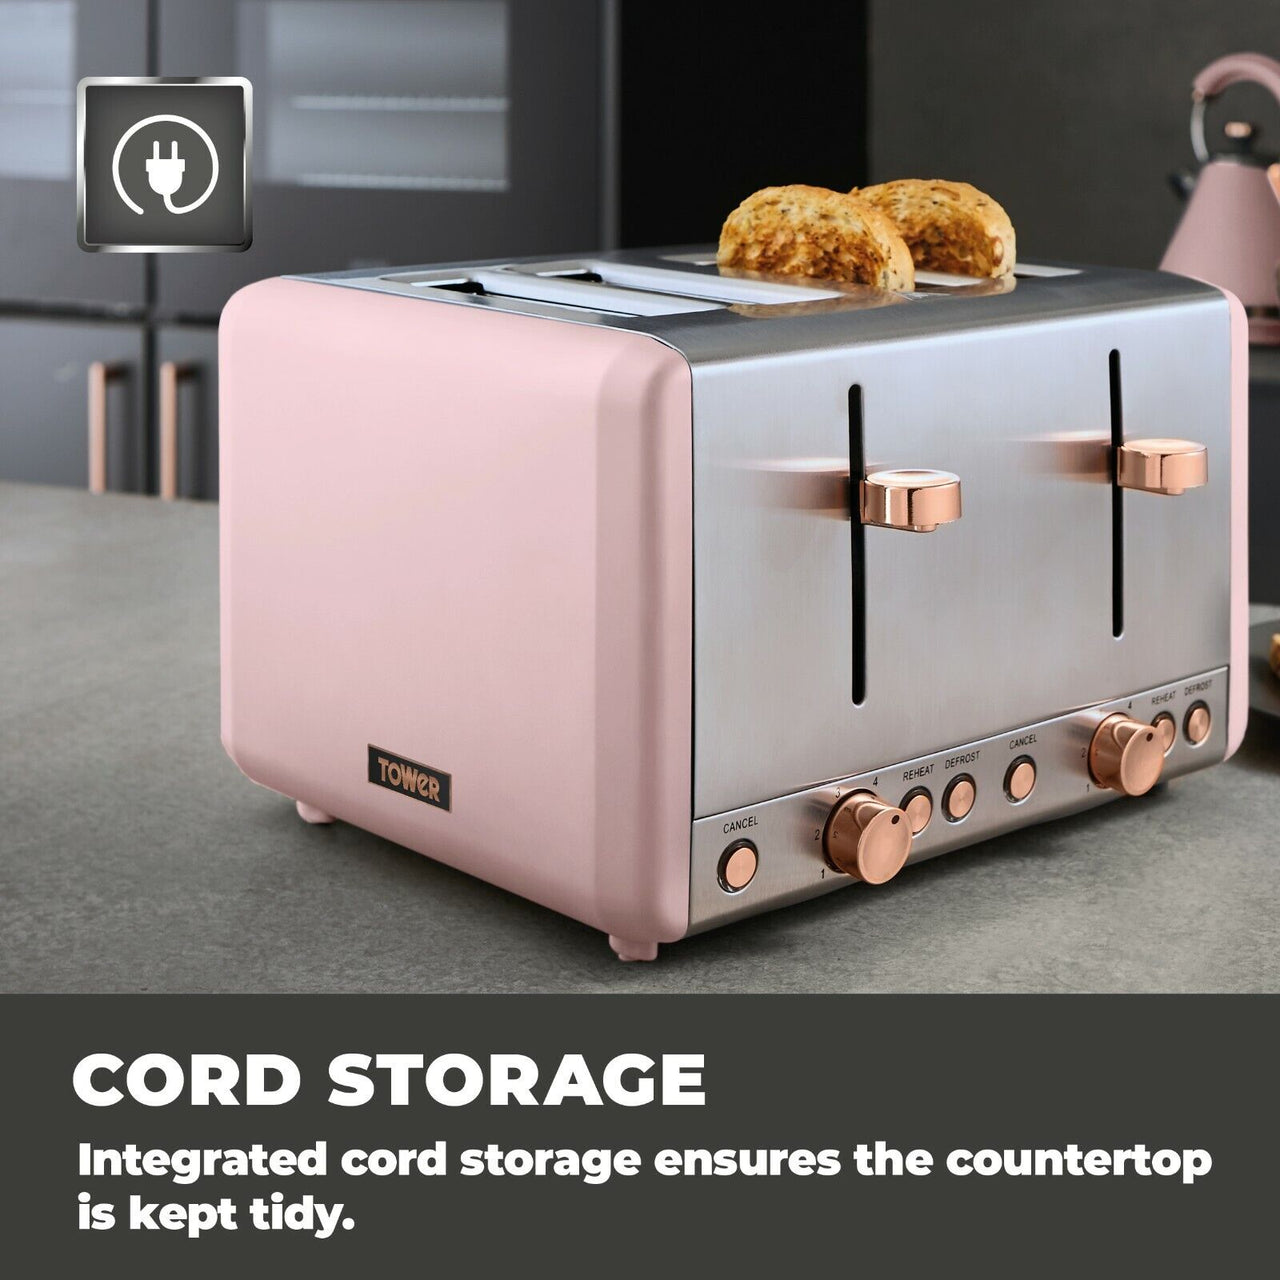 TOWER Cavaletto Kettle Toaster Bread Bin Canisters Mug Tree Towel Pole Pink & Rose Gold